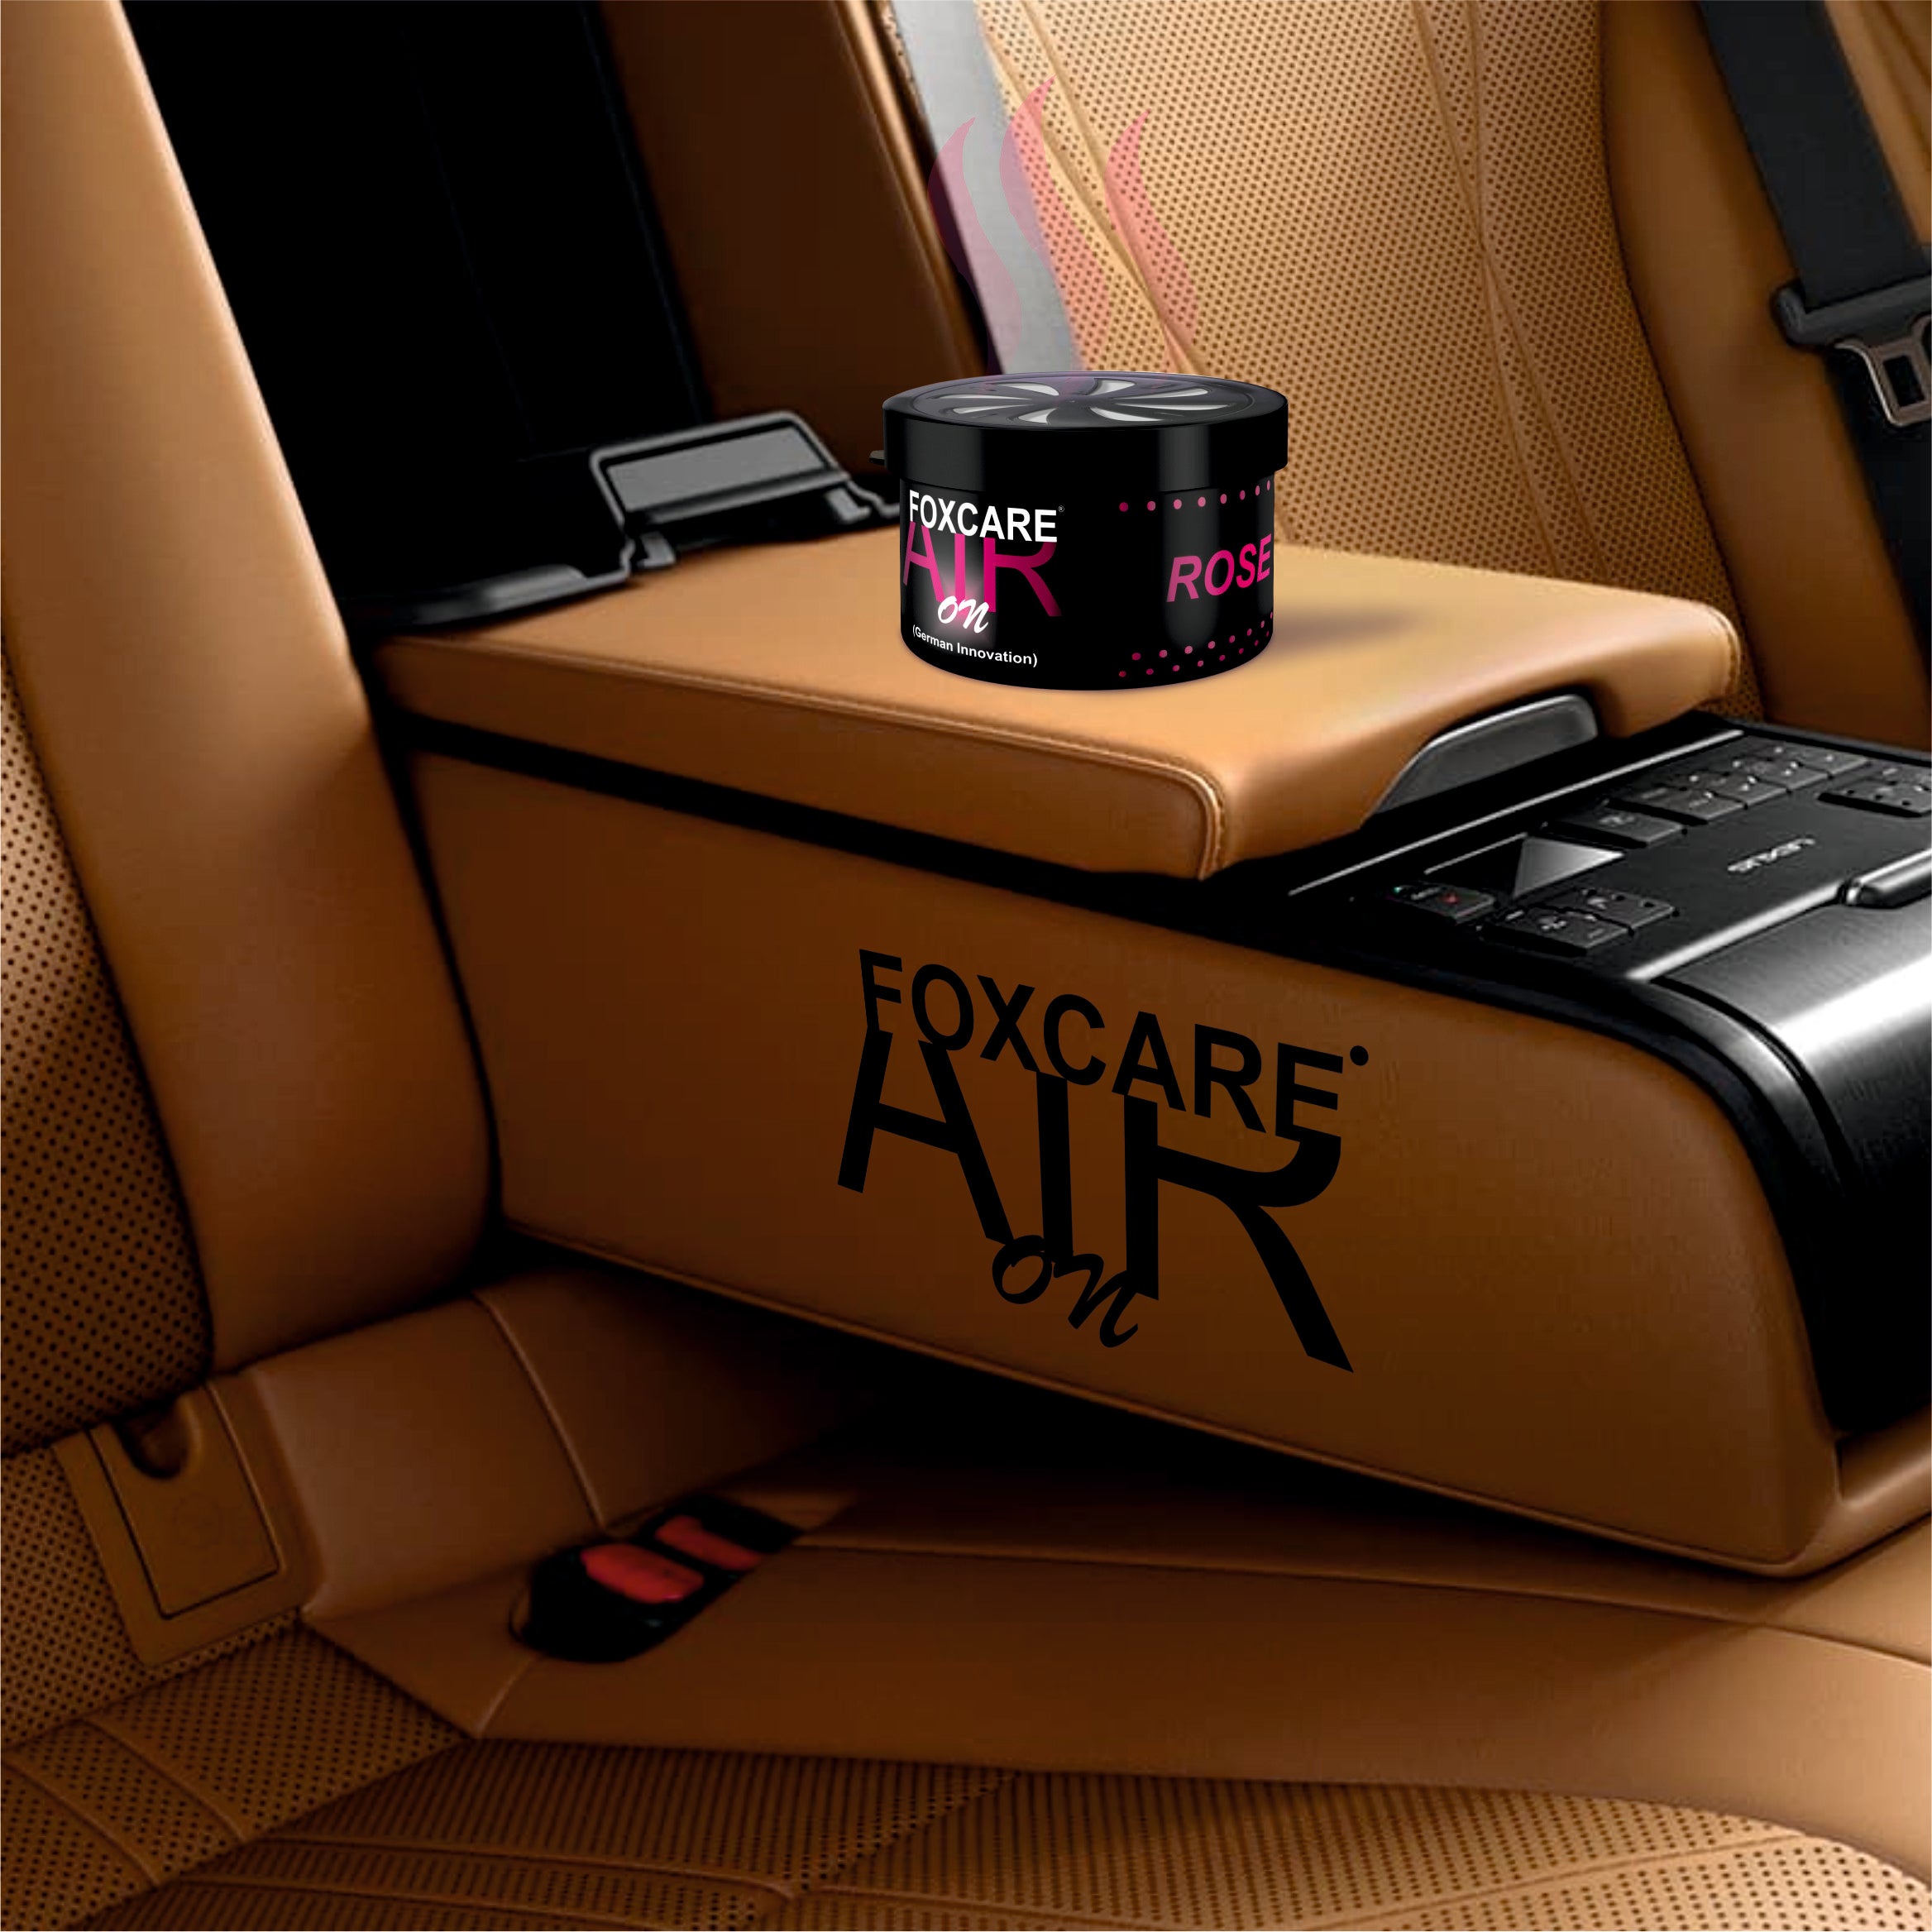 Foxcare Air On Rose 31 Organic Car Perfume Bar, Foxcare Air On Strong Fiber Air Freshener to Freshen'up Your Car | 50 g Car Accessories interior car perfumes and fresheners With German Innovation.